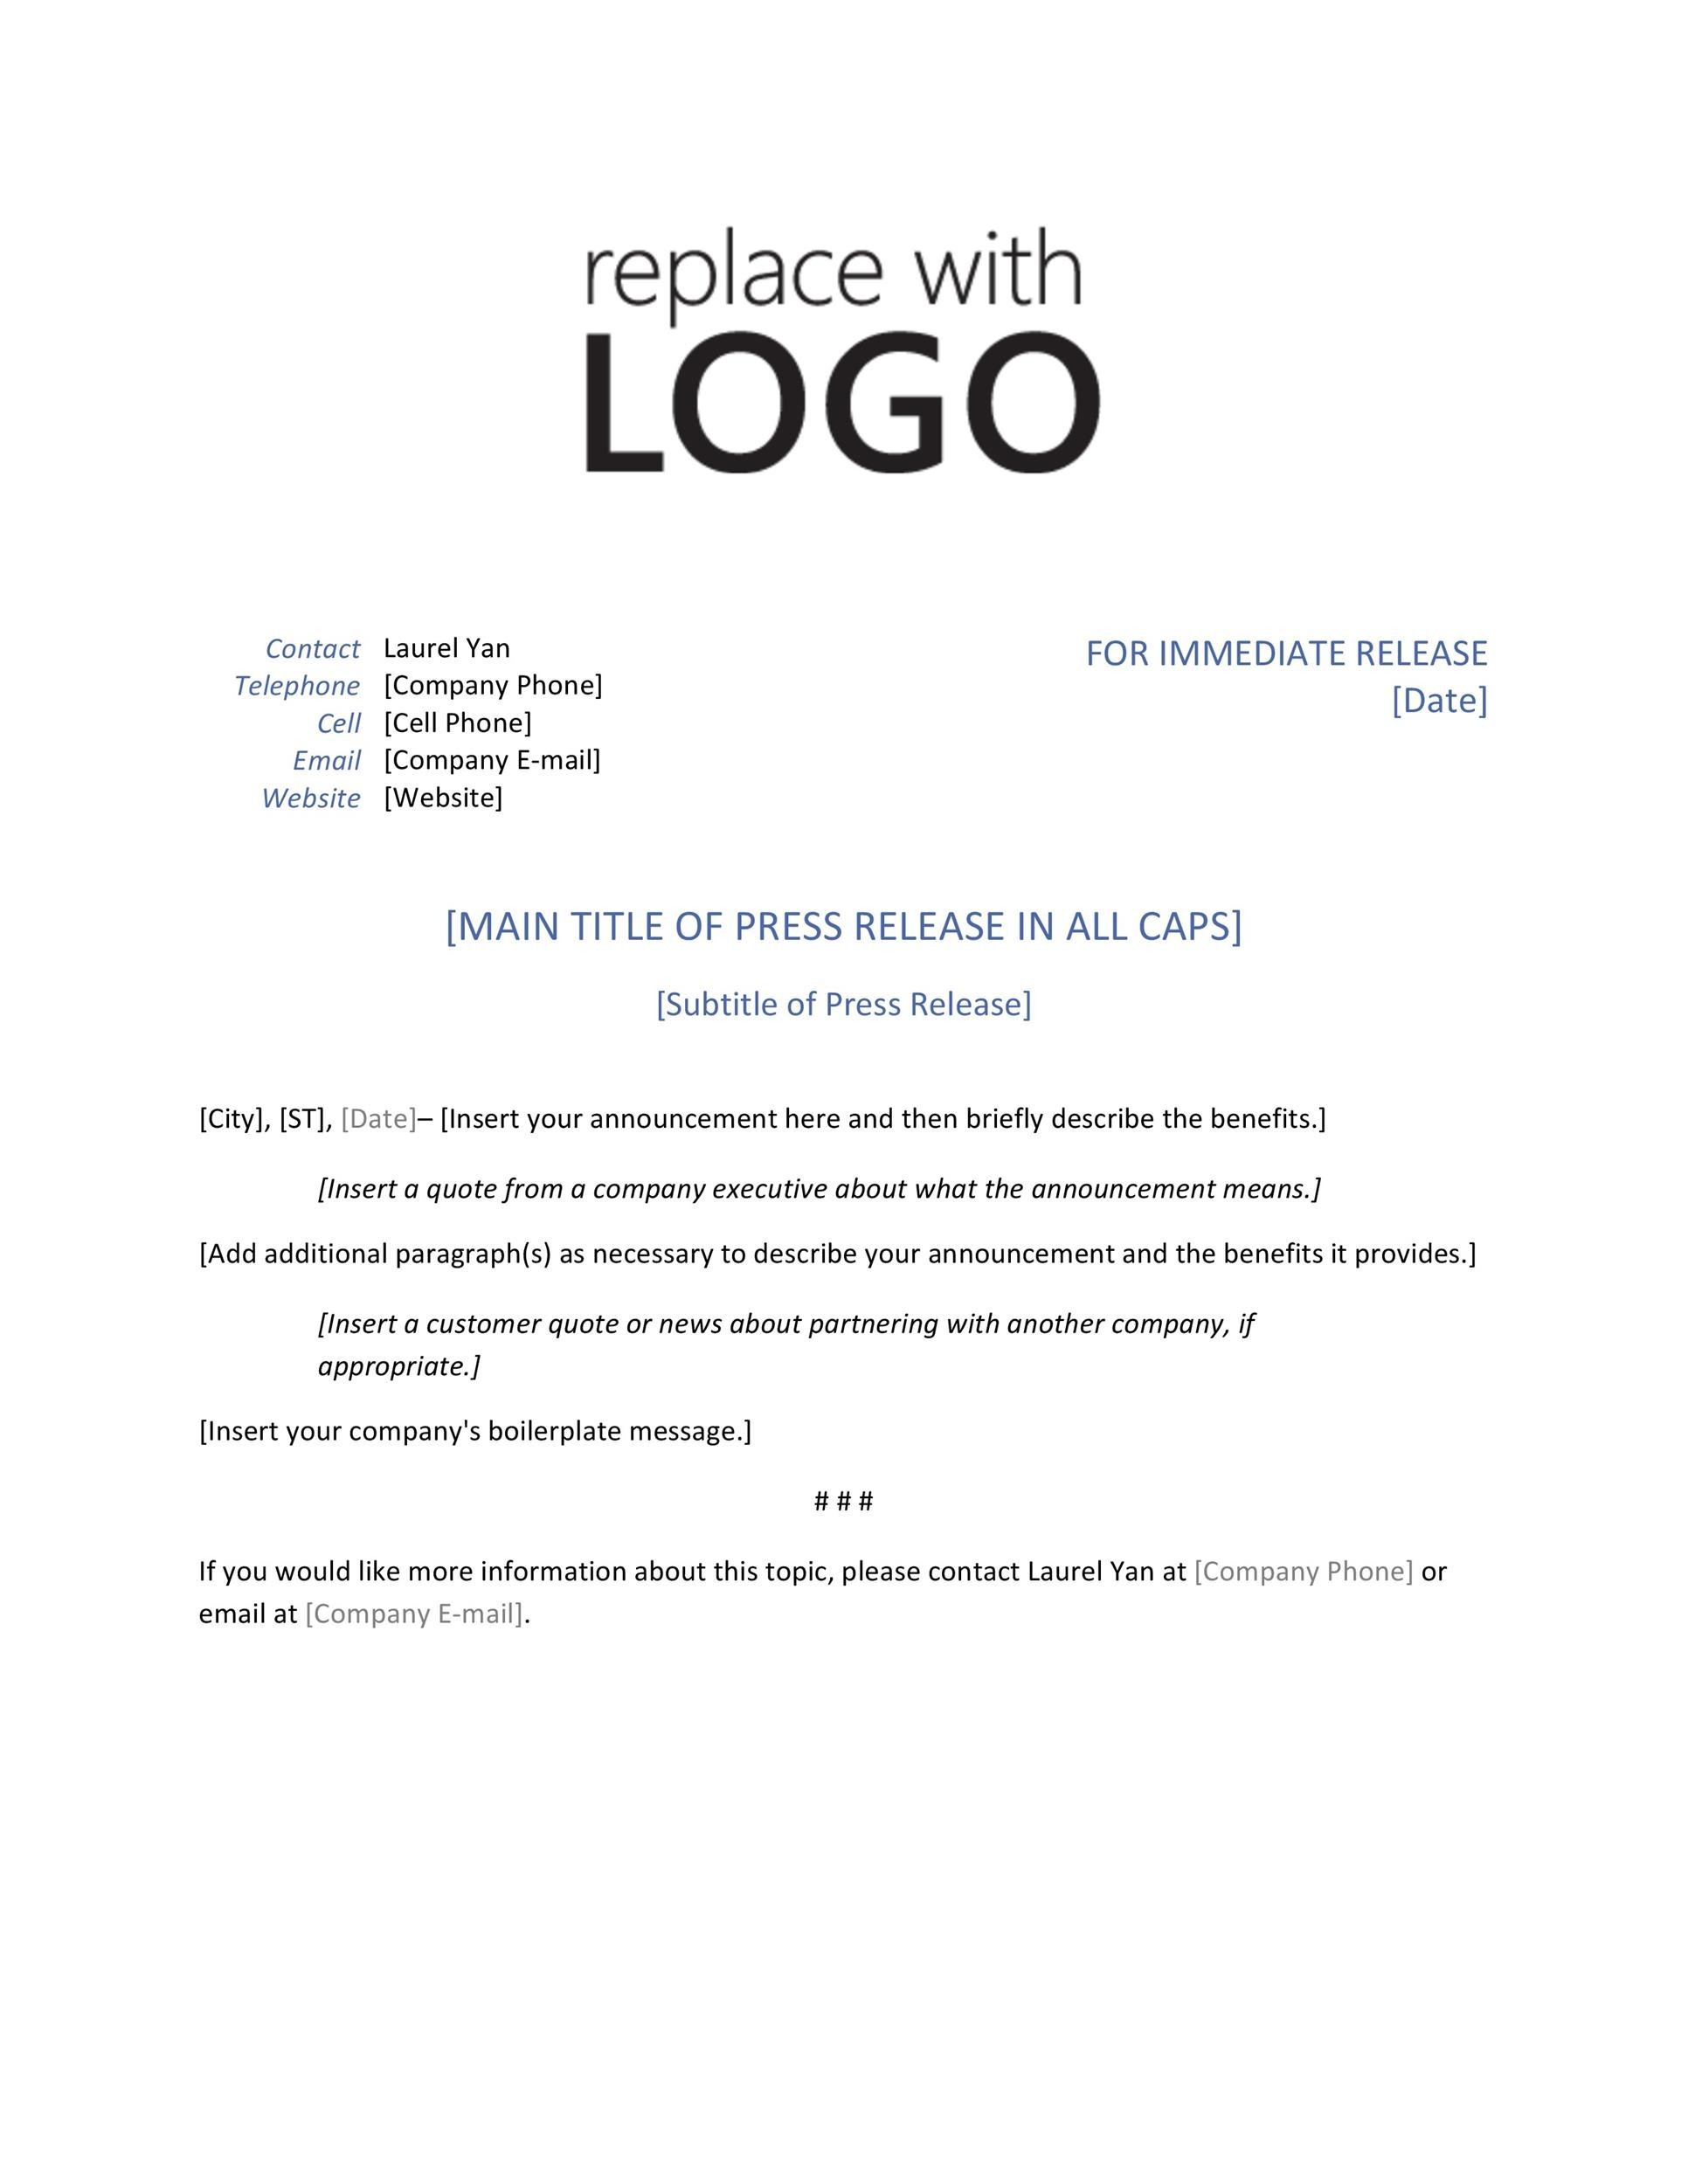 46 Press Release Format Templates Examples Samples TemplateLab